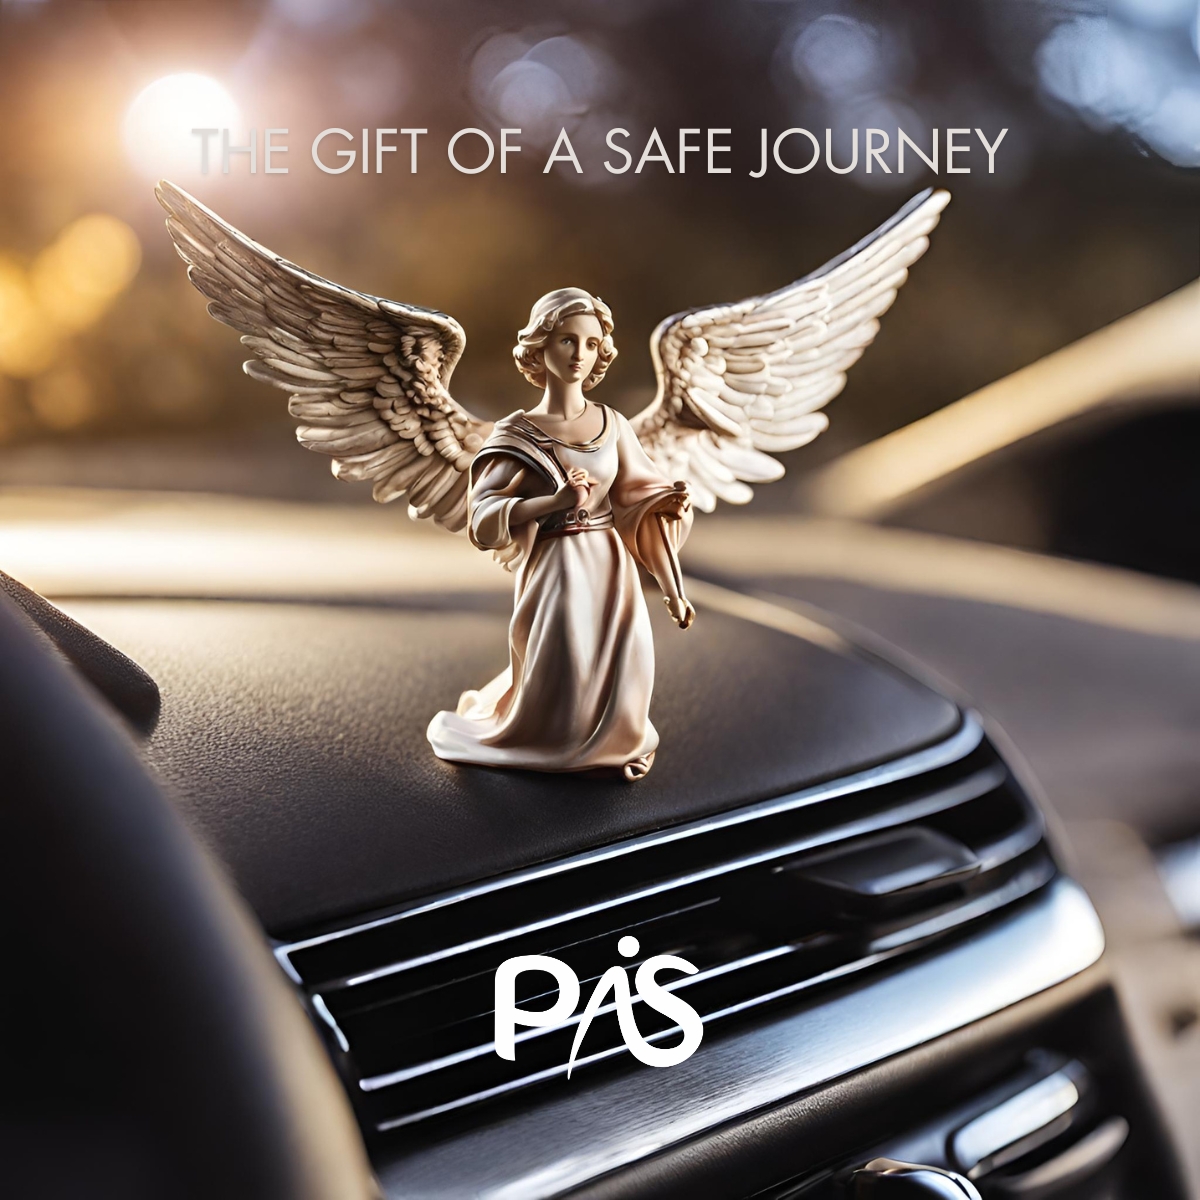 Gift the assurance of safe journeys this holiday with PIS Car Insurance. Drive worry-free, knowing your loved ones are covered on every road twist. Choose the perfect match for security and smooth rides. #CarInsuranceGift #PISLebanon #HolidaySafety #PoliciesThatWork